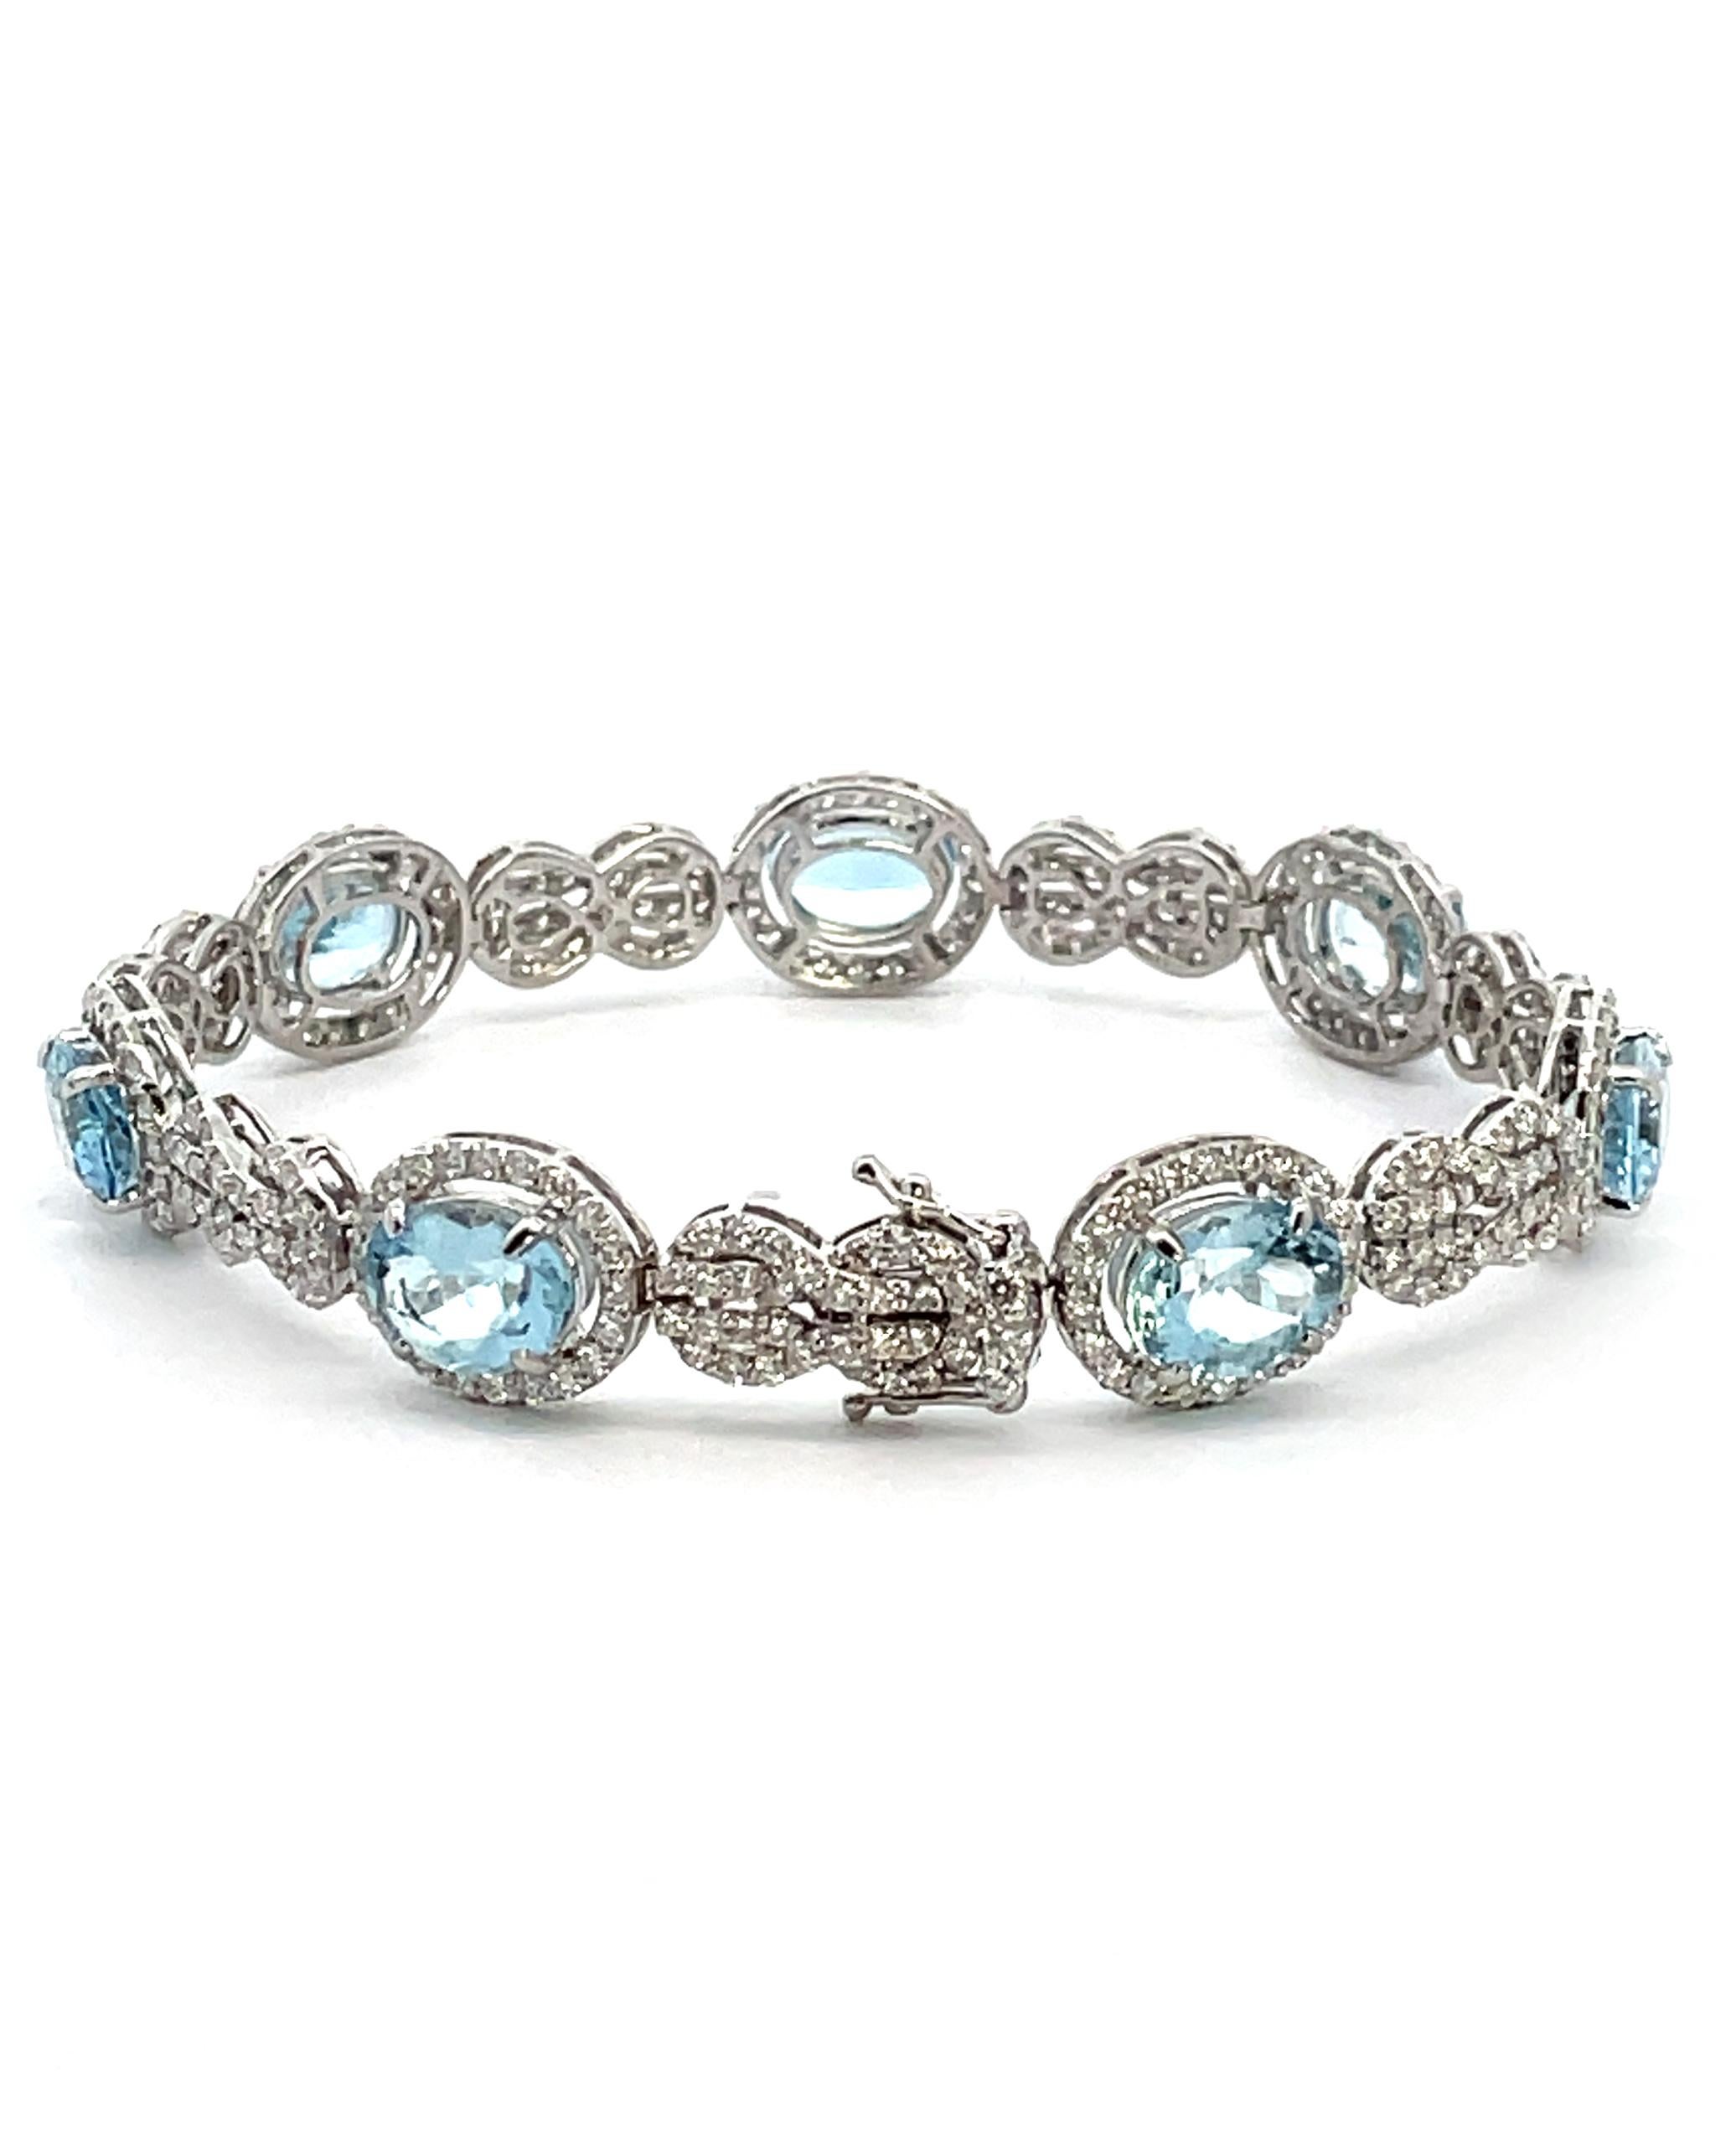 18K white gold bracelet with 7 oval shape aquamarines weighing 10.91 carats total and 360 round diamonds weighing 4.63 carats total.

* Approximately 10.8mm wide
* Oval shaped aquamarines measure about 9x7mm each.
* Diamonds are on average H color,